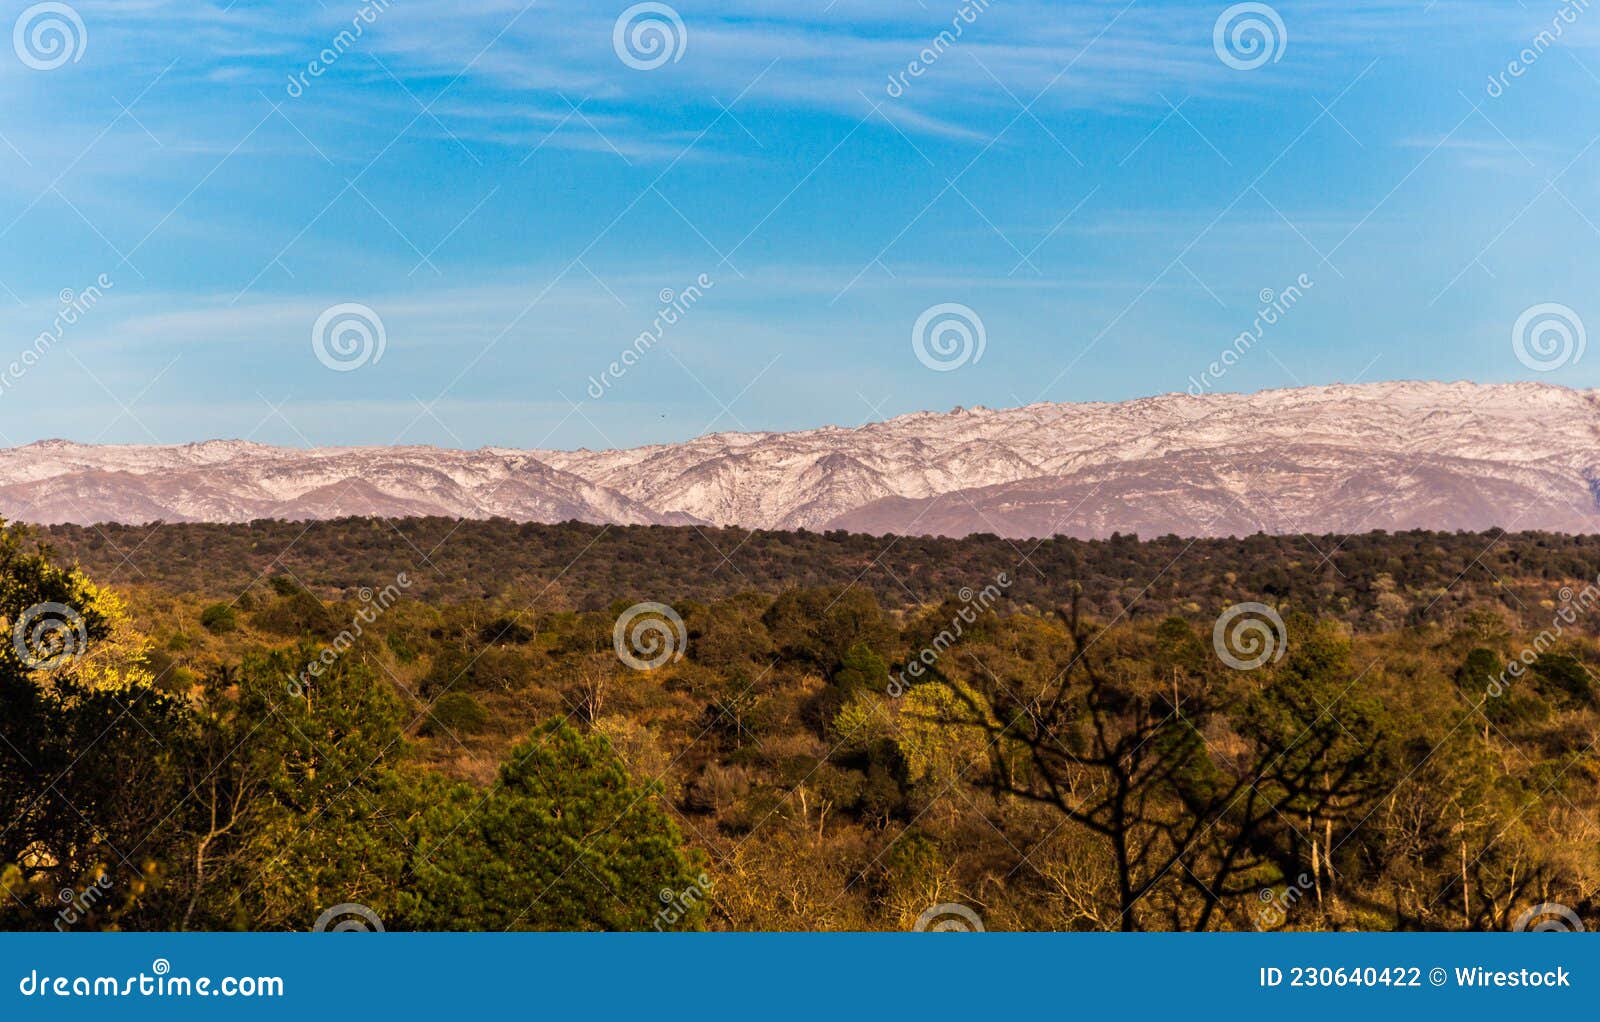 panoramic view of the snowy mountain ranges in the calamuchita valley, cordoba, argentina